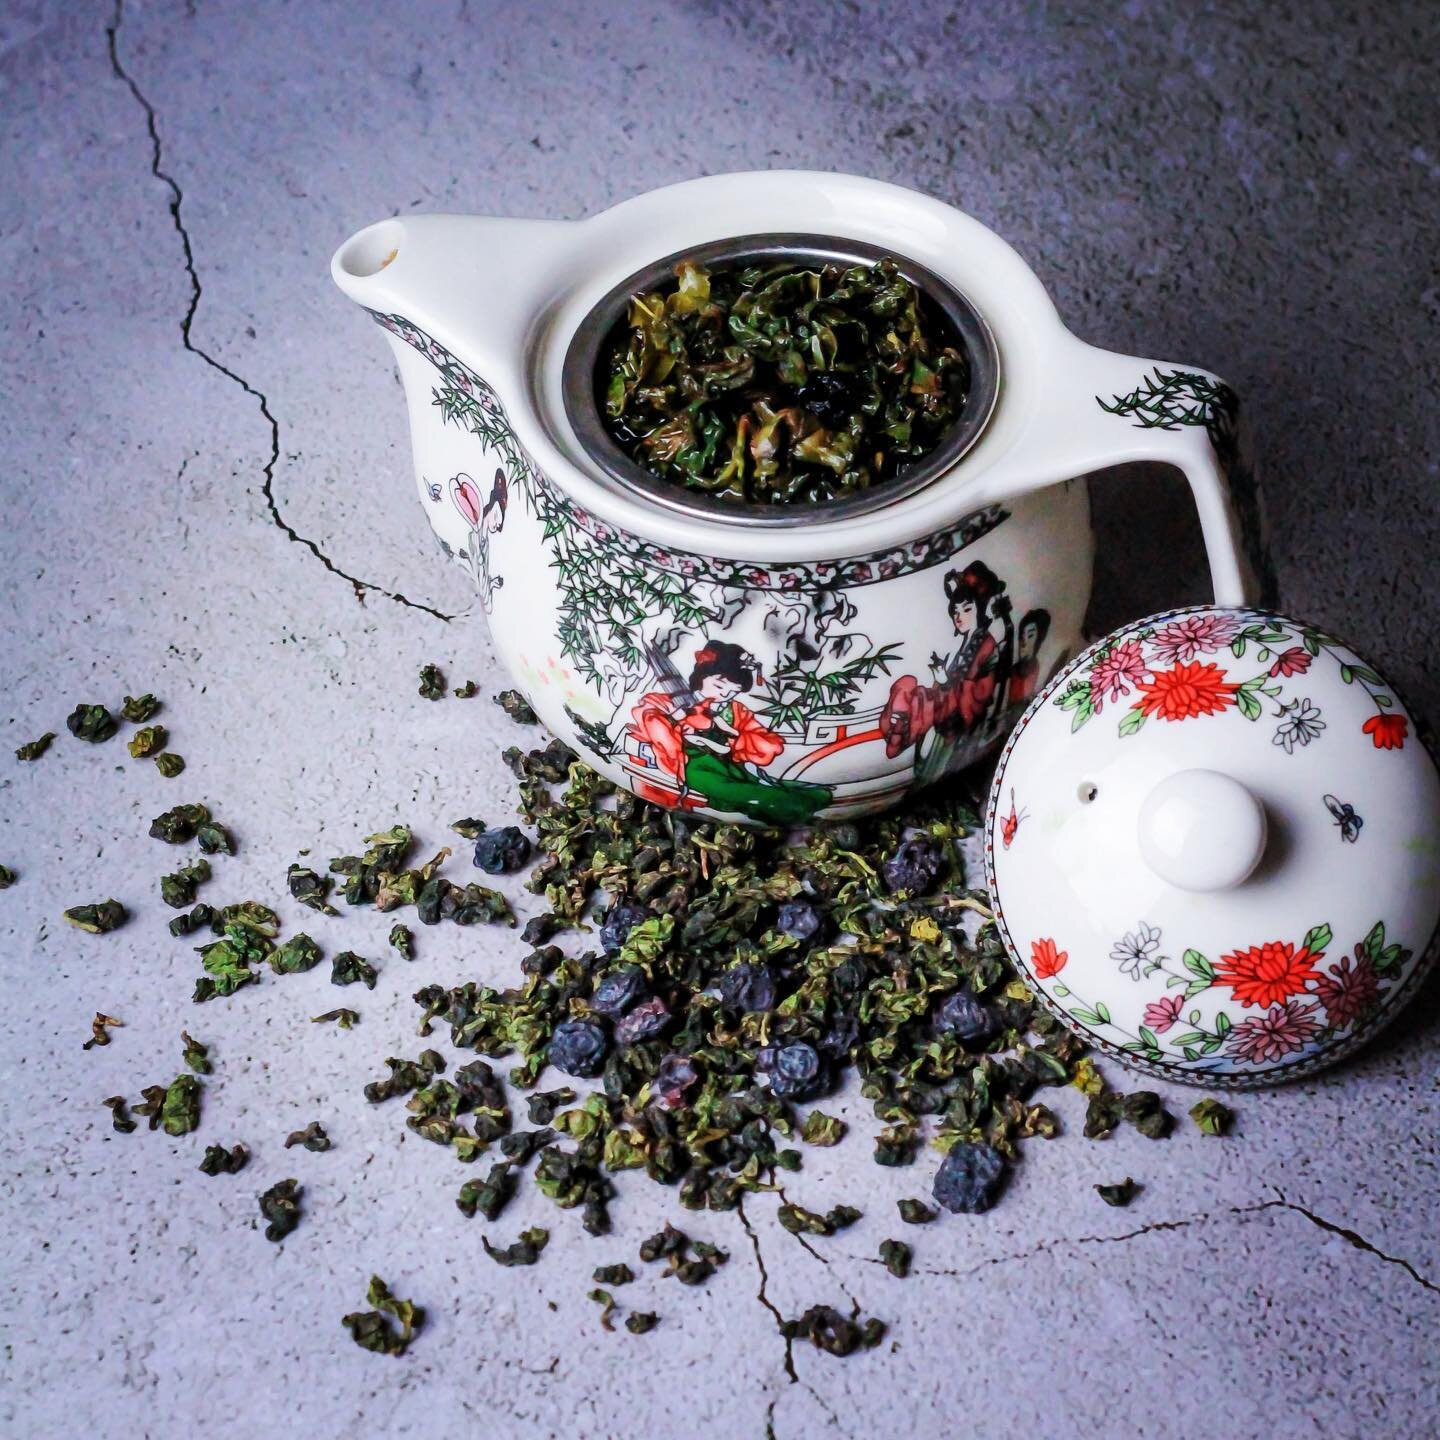 Start with amazing tea, ferment slowly the traditional way and you&rsquo;ll be rewarded with amazing kombucha. That&rsquo;s why we painstakingly select only the choicest tea to brew with. Like this beautiful Tieguanyin oolong from Fujian province. Th